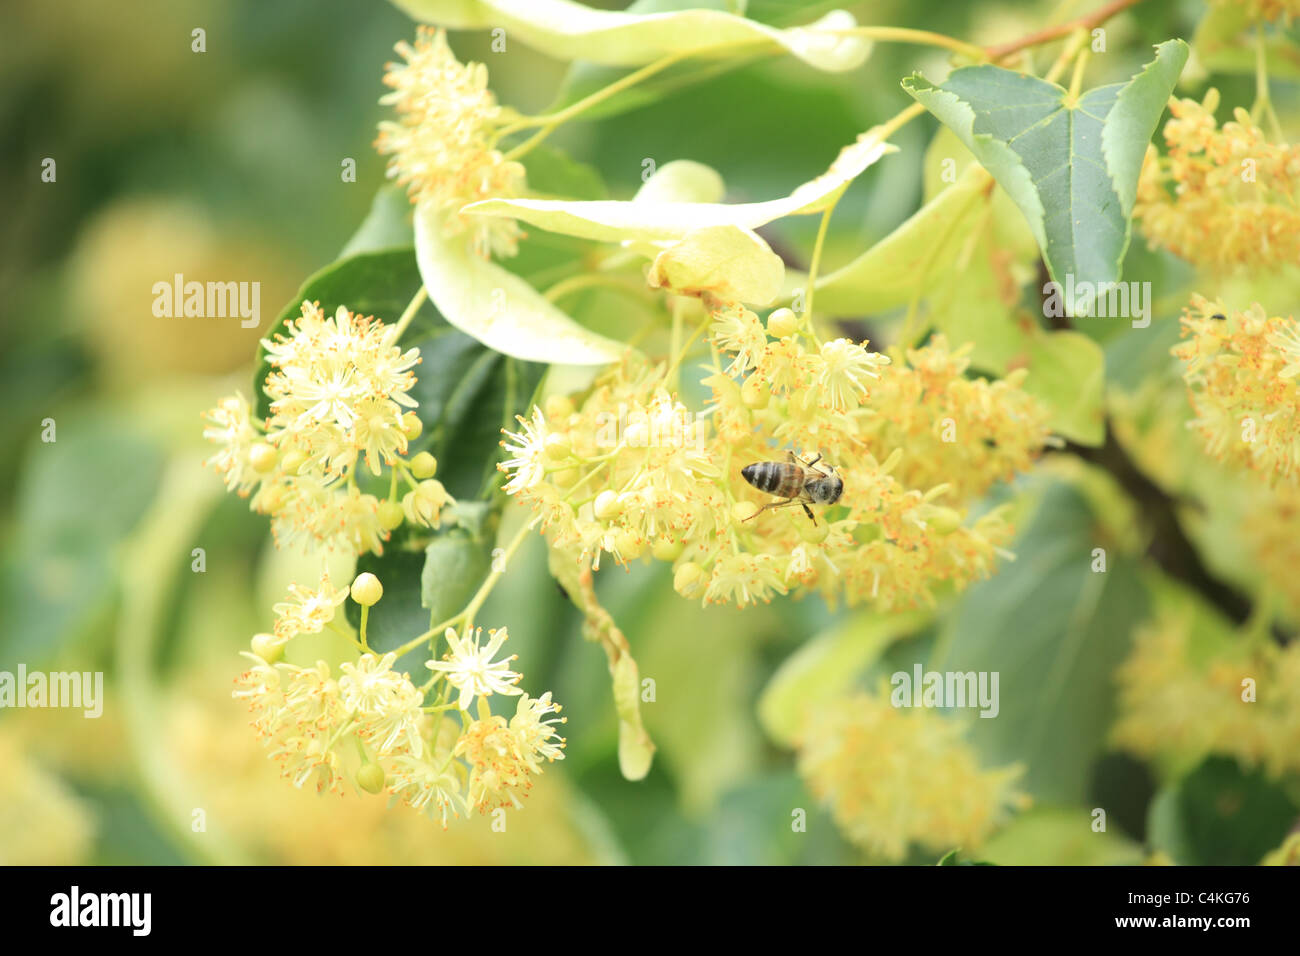 Western honey bee collecting nectar on the flowers of Small-leaved Linden tree (Tilia cordata). Location: Male Karpaty, Slovakia Stock Photo